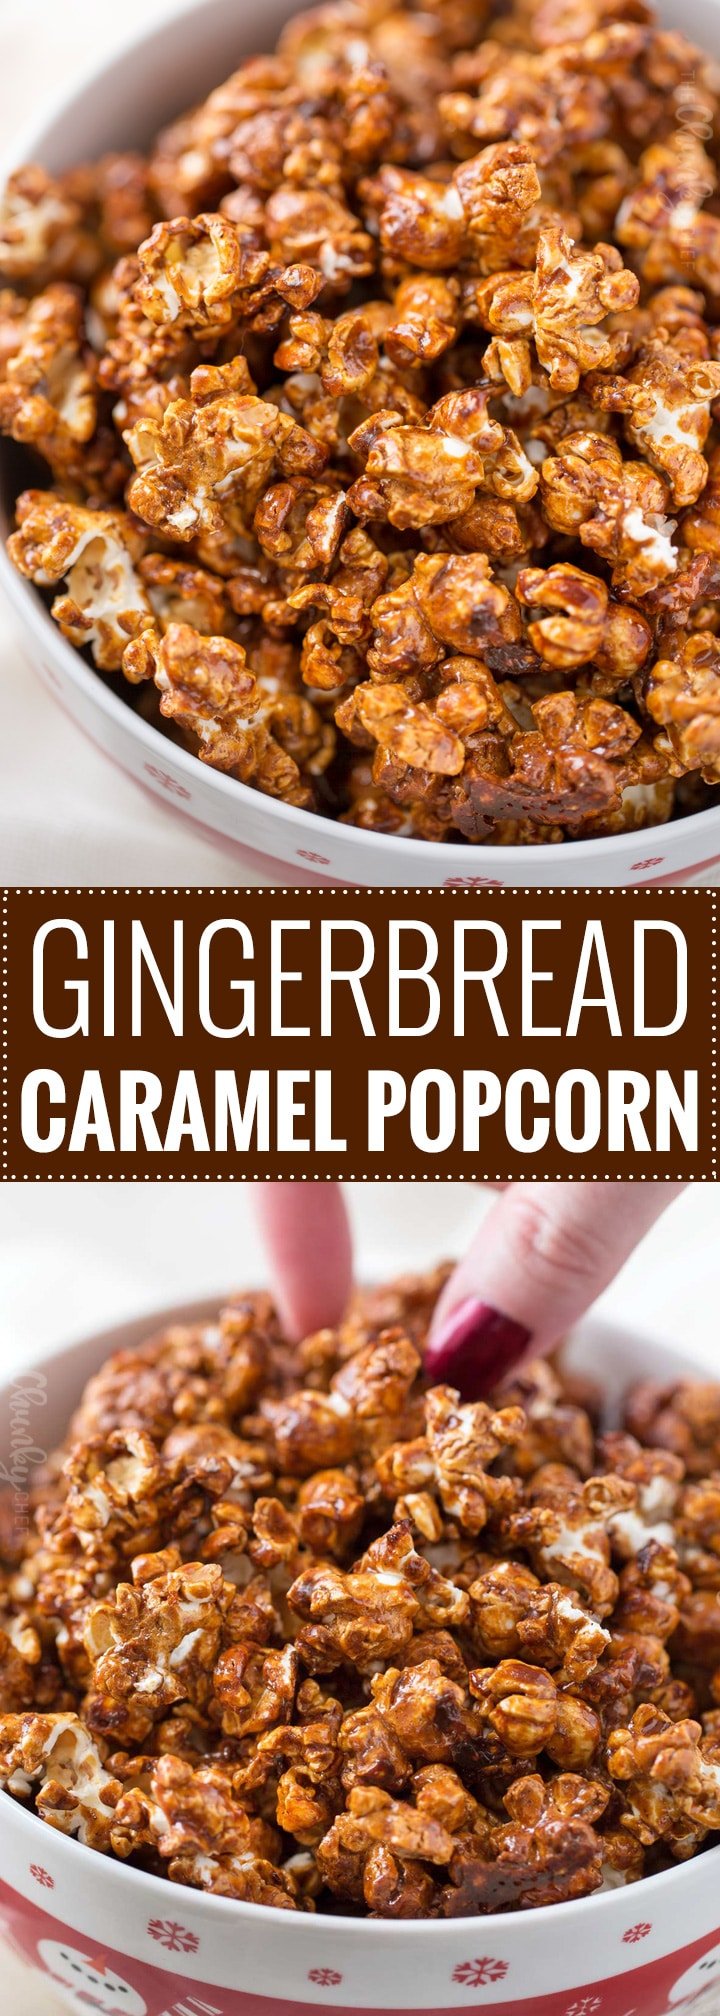 Gingerbread Caramel Corn | Classic caramel corn combines with gingerbread spices in the best caramel popcorn EVER!  You'll  love snacking on this sweet and crunchy popcorn! | The Chunky Chef | #popcorn #caramelcorn #homemadecaramel #snackrecipes #homemade #gingerbread